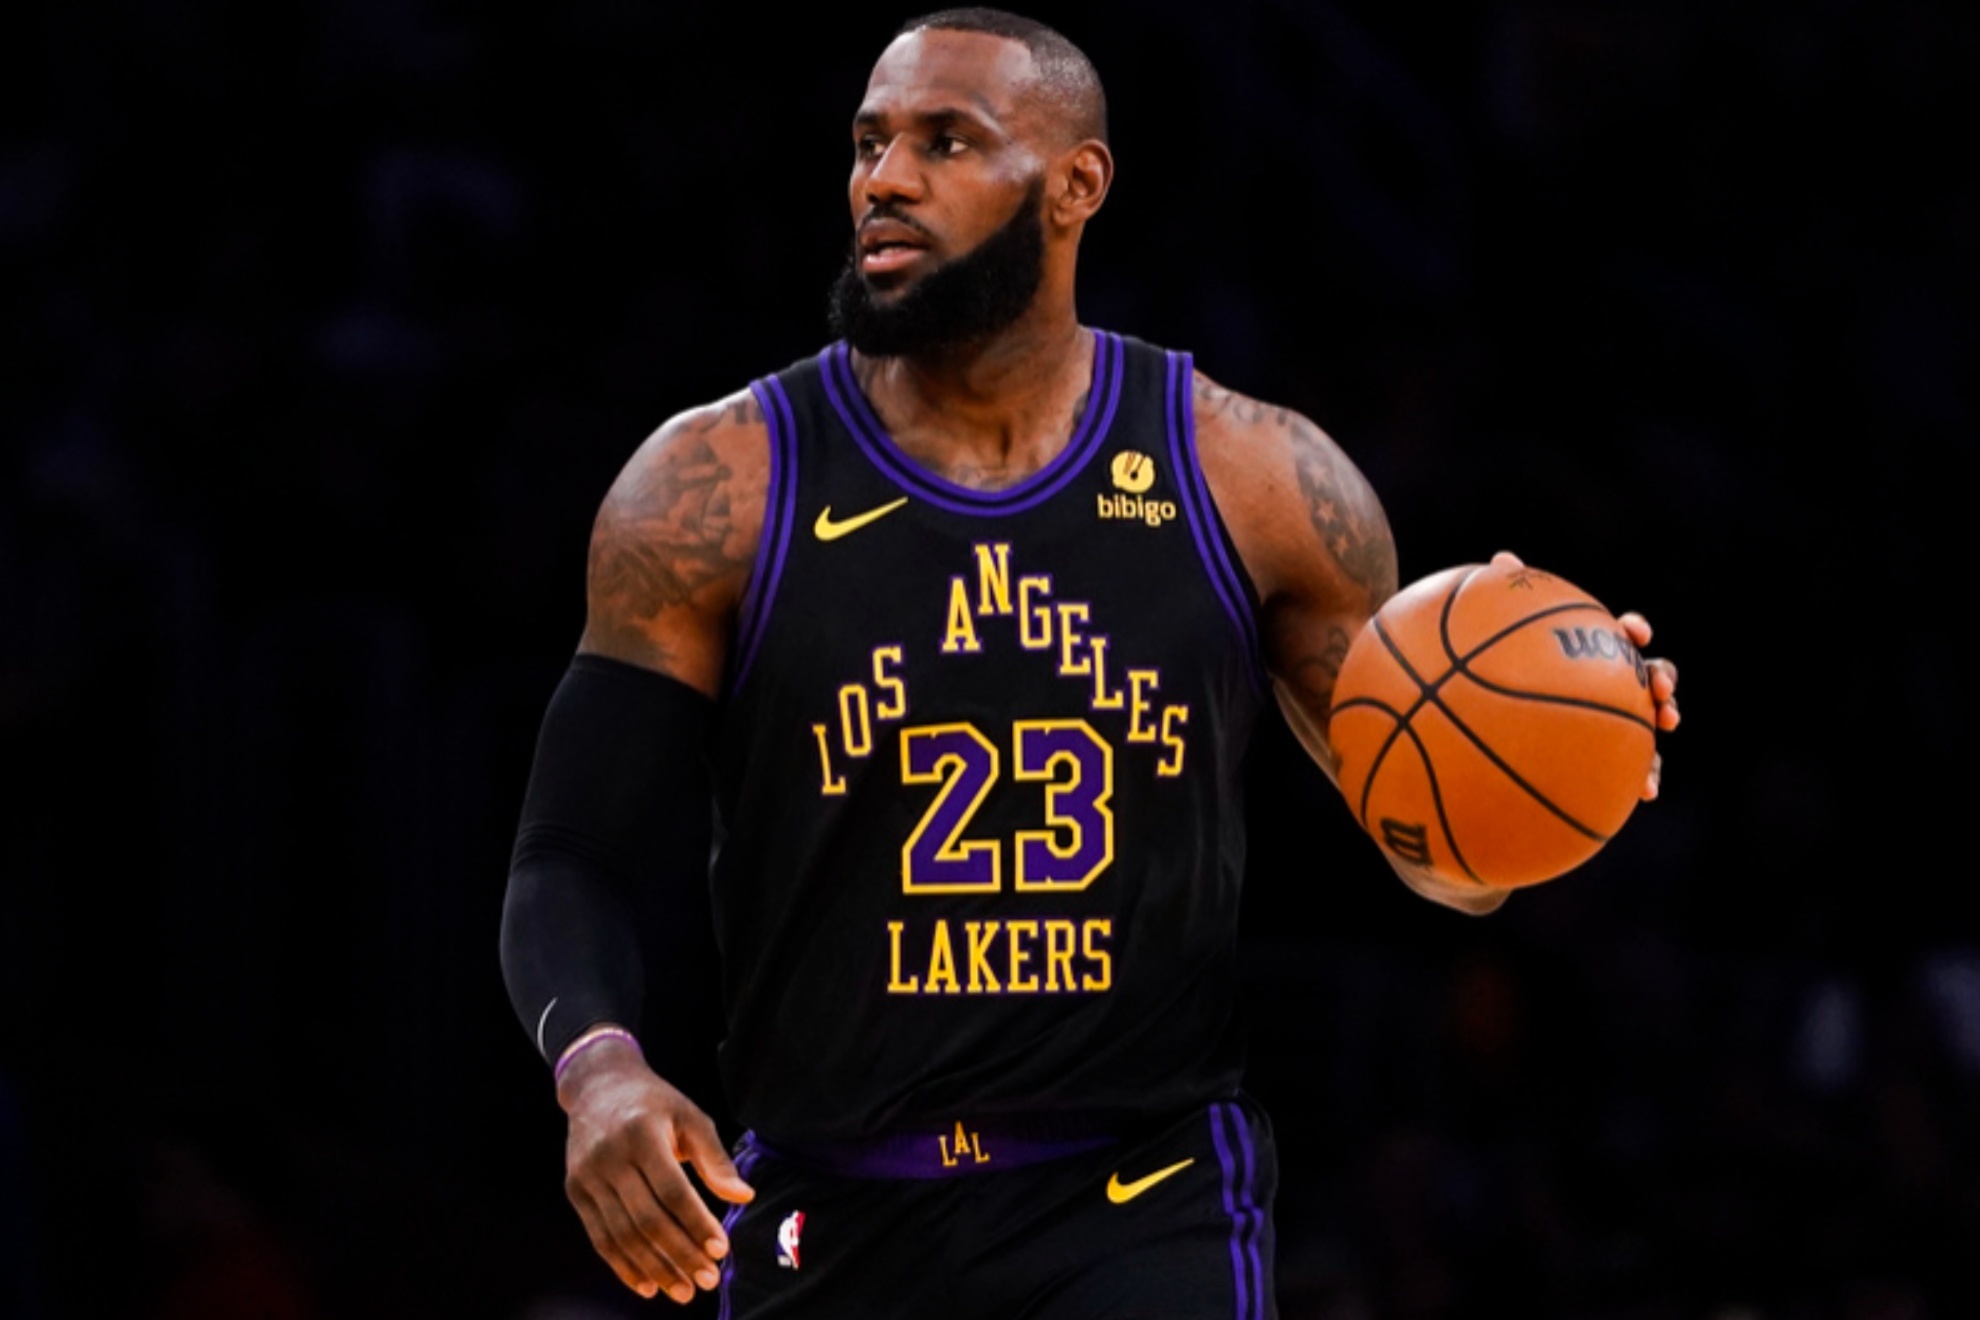 LeBron James will appear with his son Bronny in a new set of Fanatics trading cards